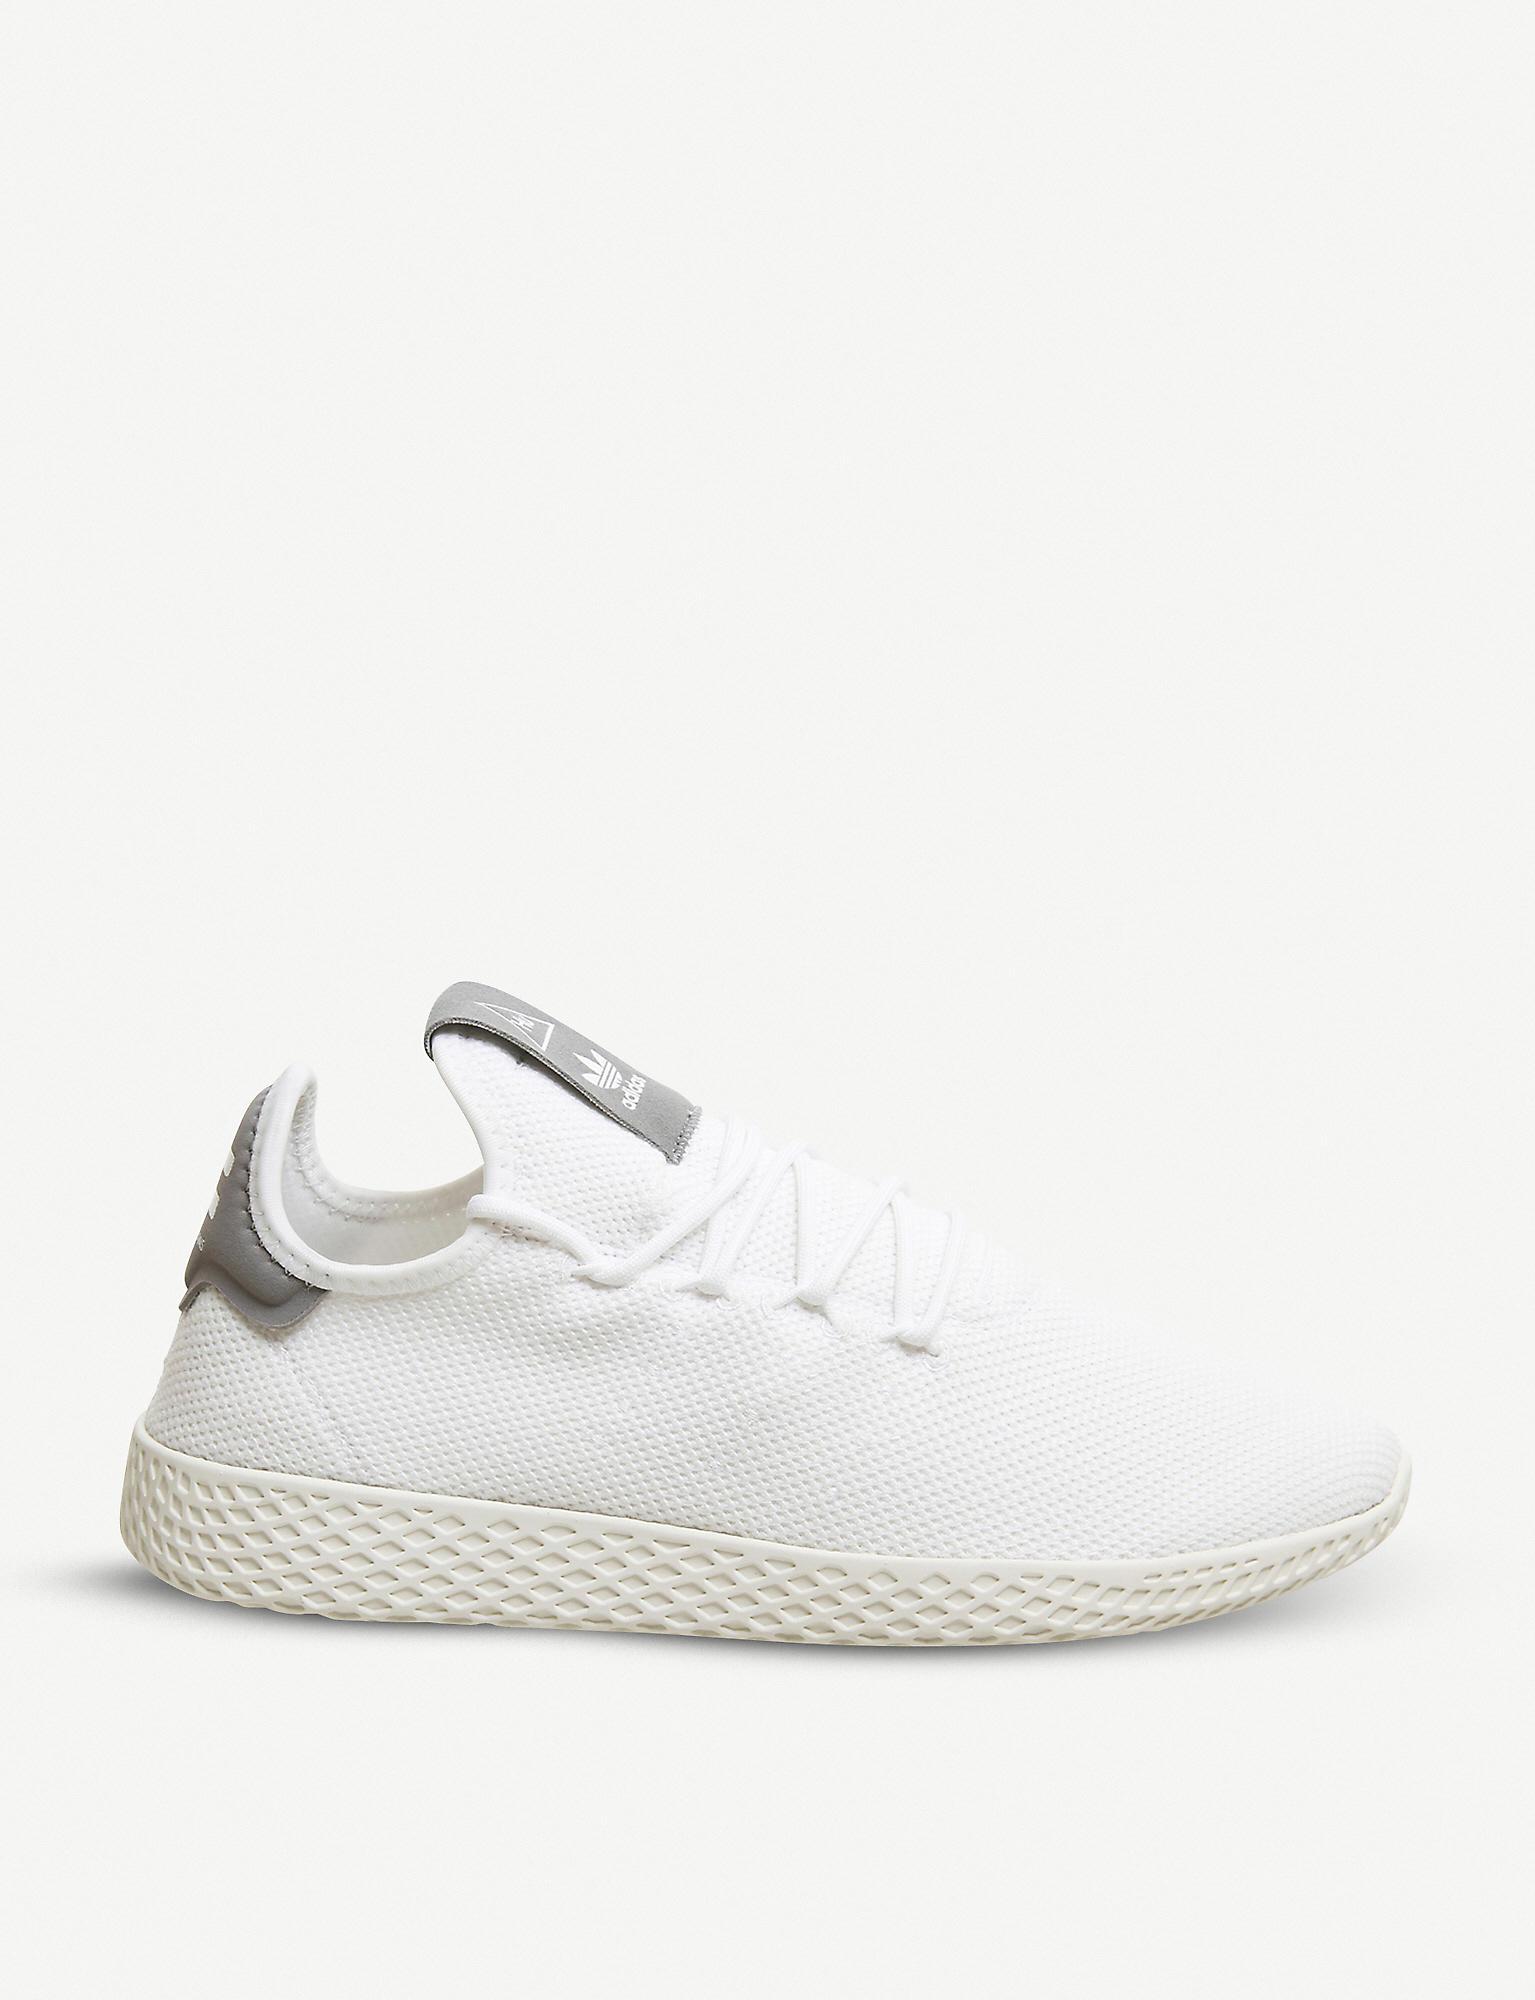 adidas Williams Tennis Shoes in White | Lyst